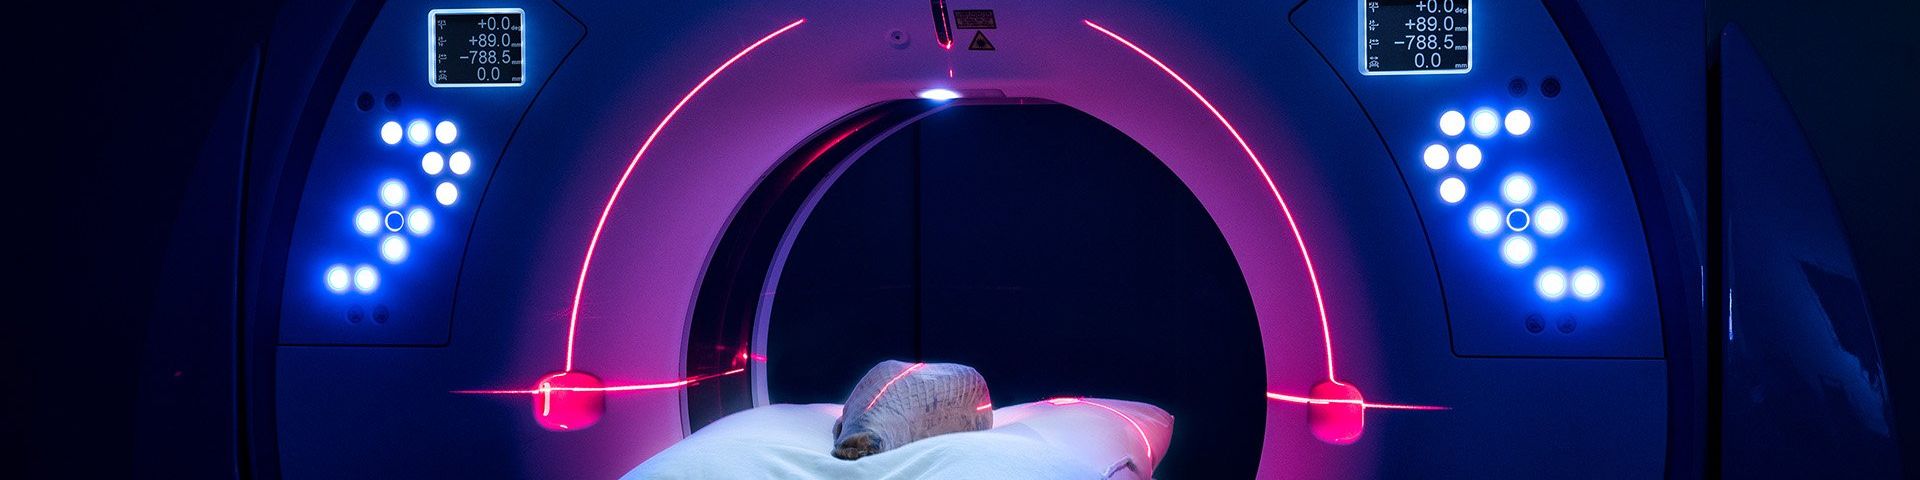 An object lies on a bed, inside a round CT scanner. It is illuminated with blue and purple lights.